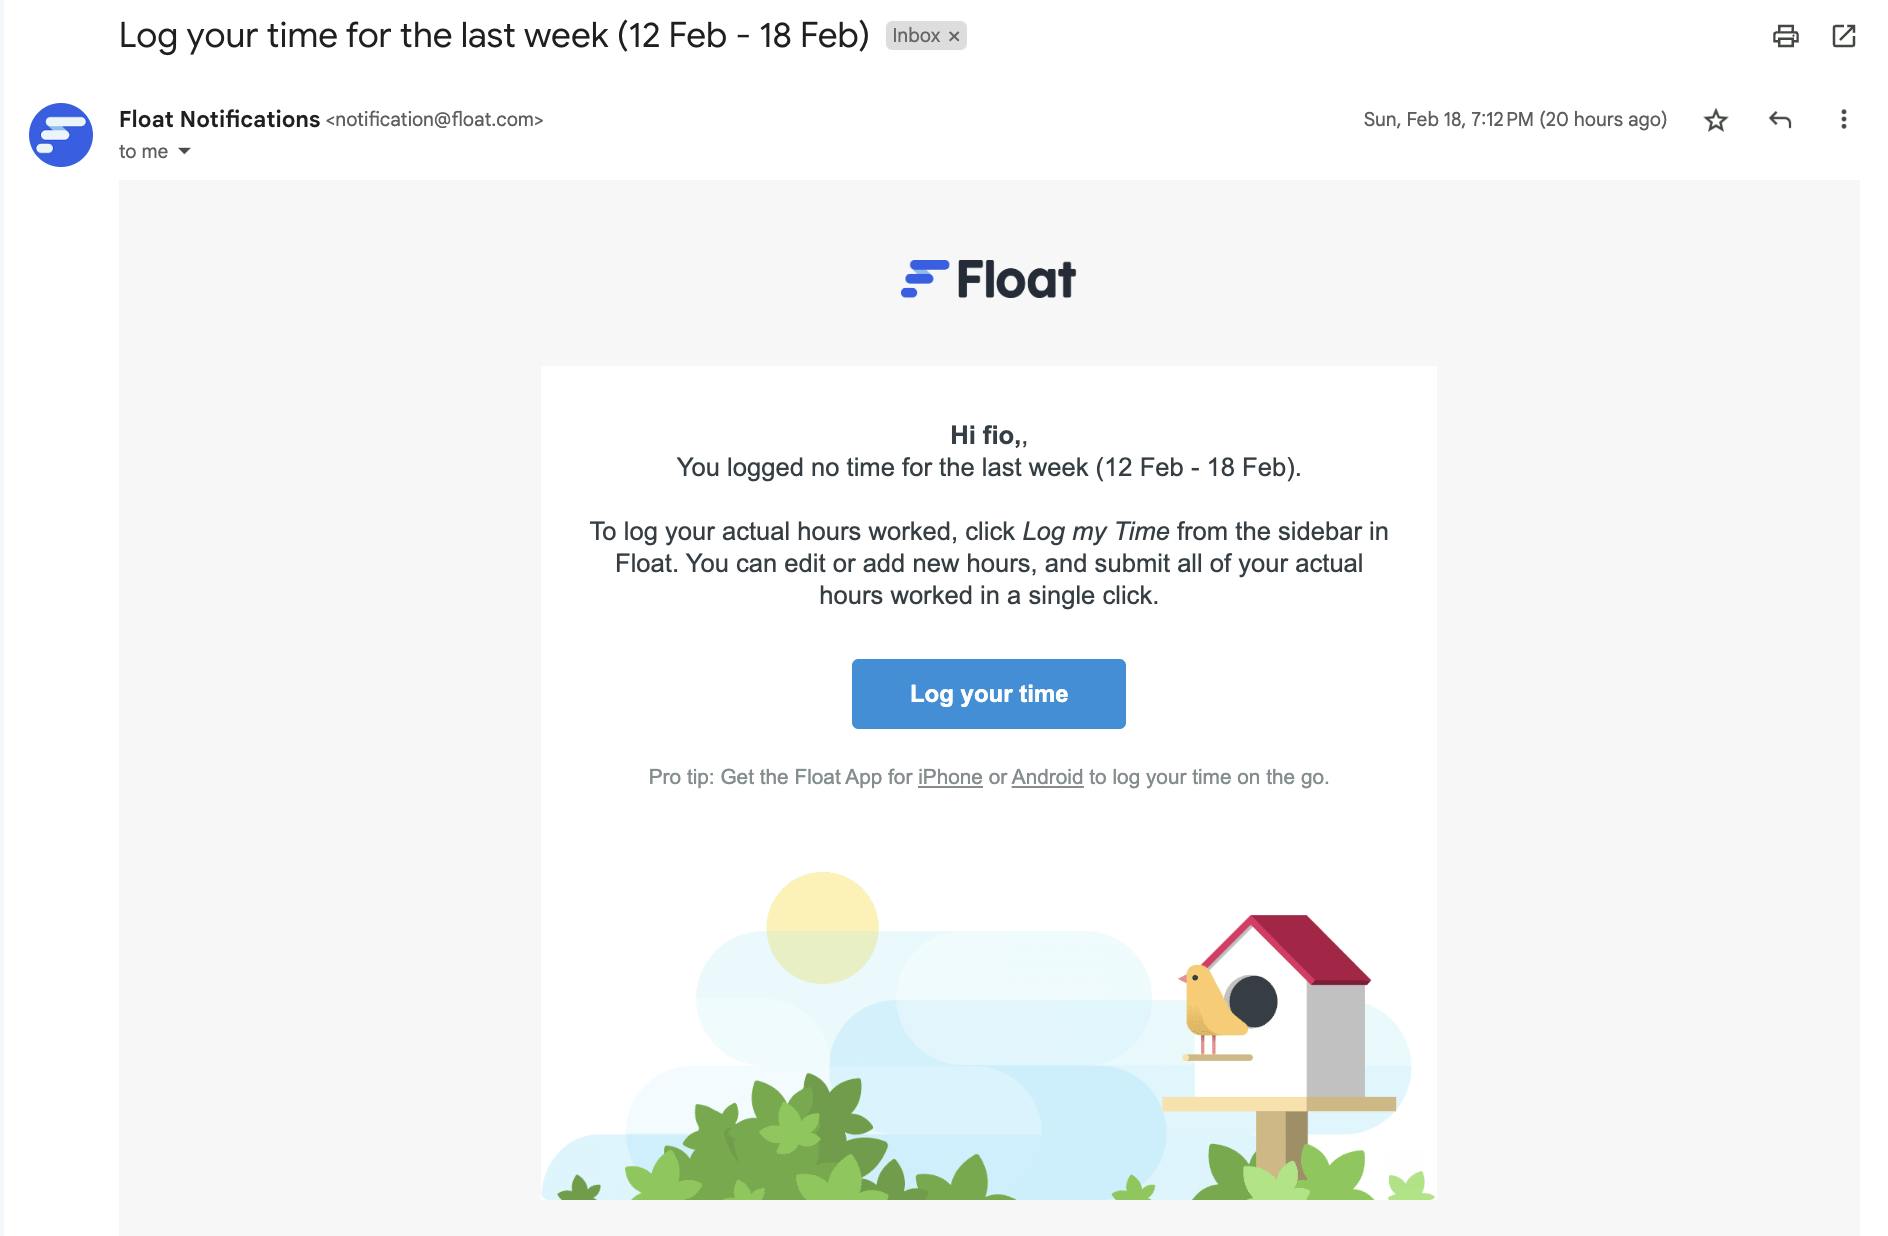 The weekly timesheet log reminder that Float sends when users haven't logged their previous week's time. 